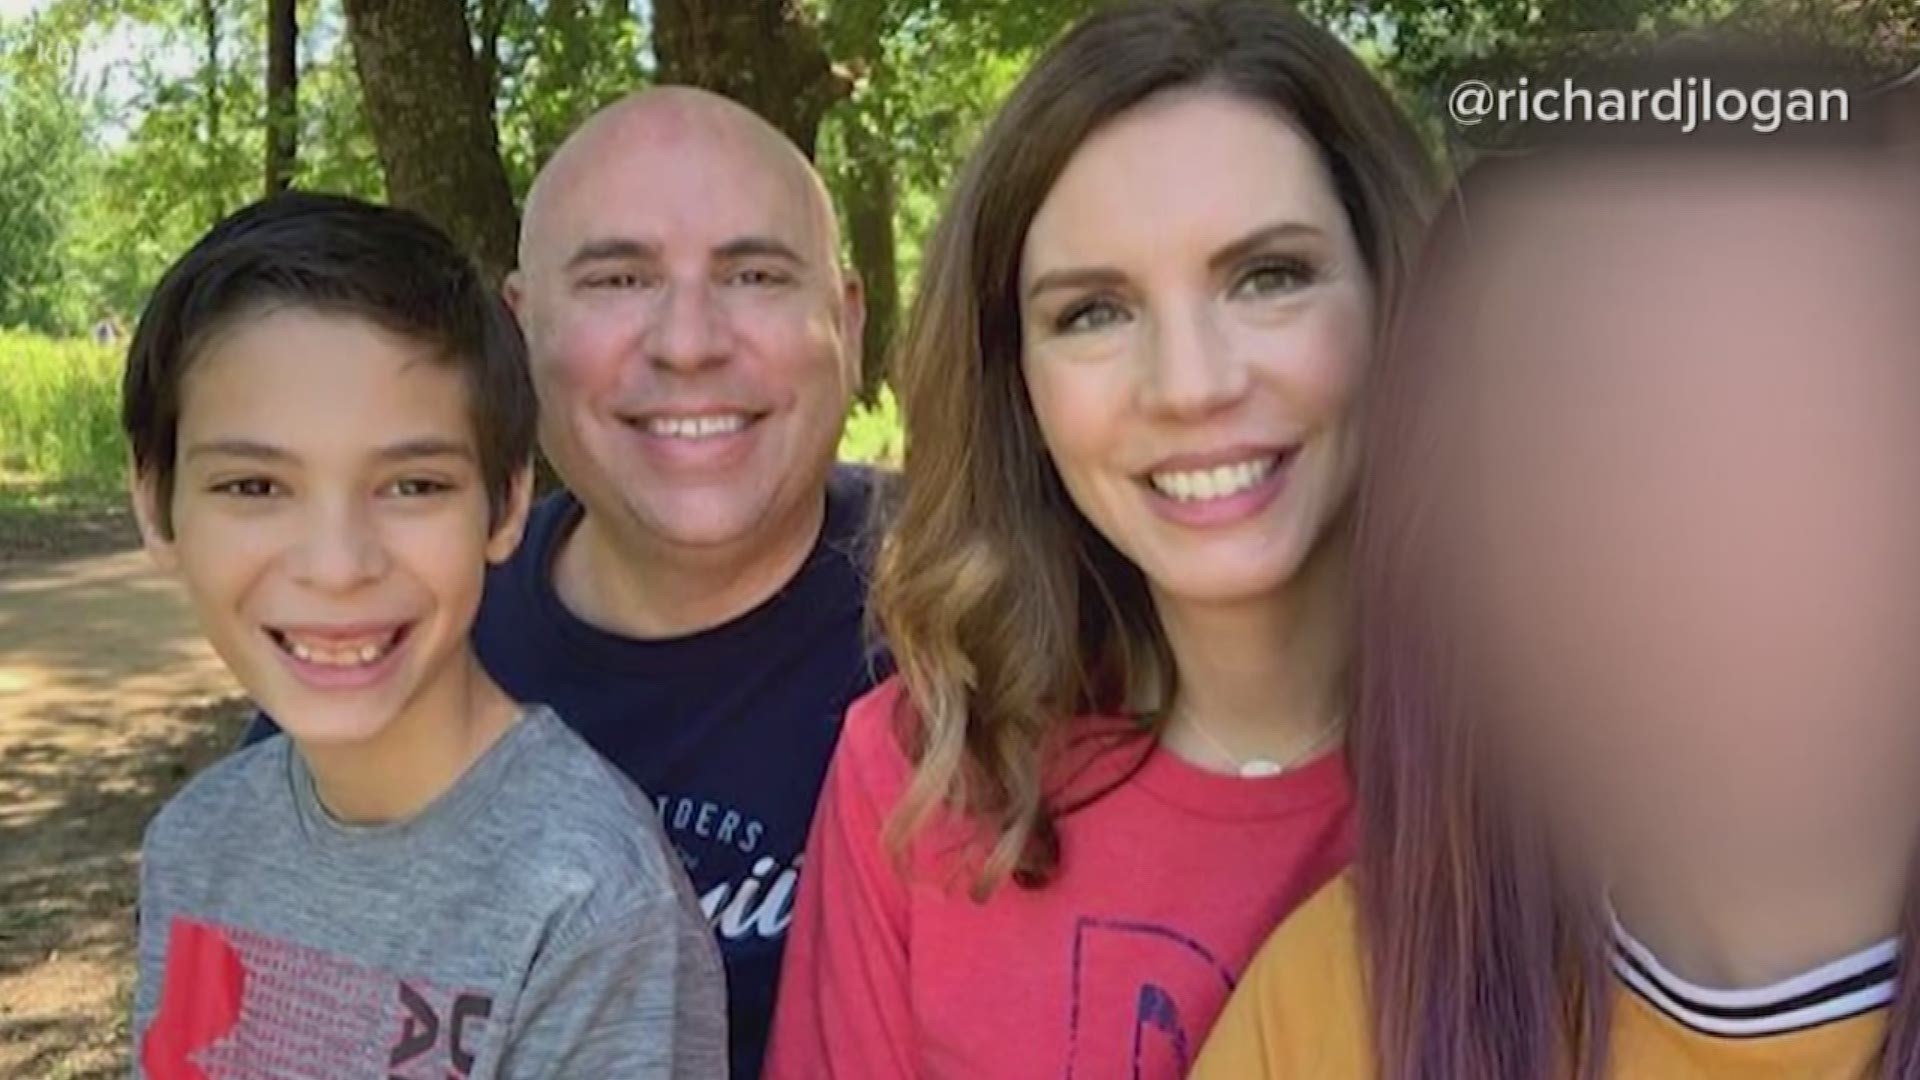 A Sugar Land mother and her 11-year-old son were found dead Tuesday. The husband and father allegedly died by suicide 150 miles away.